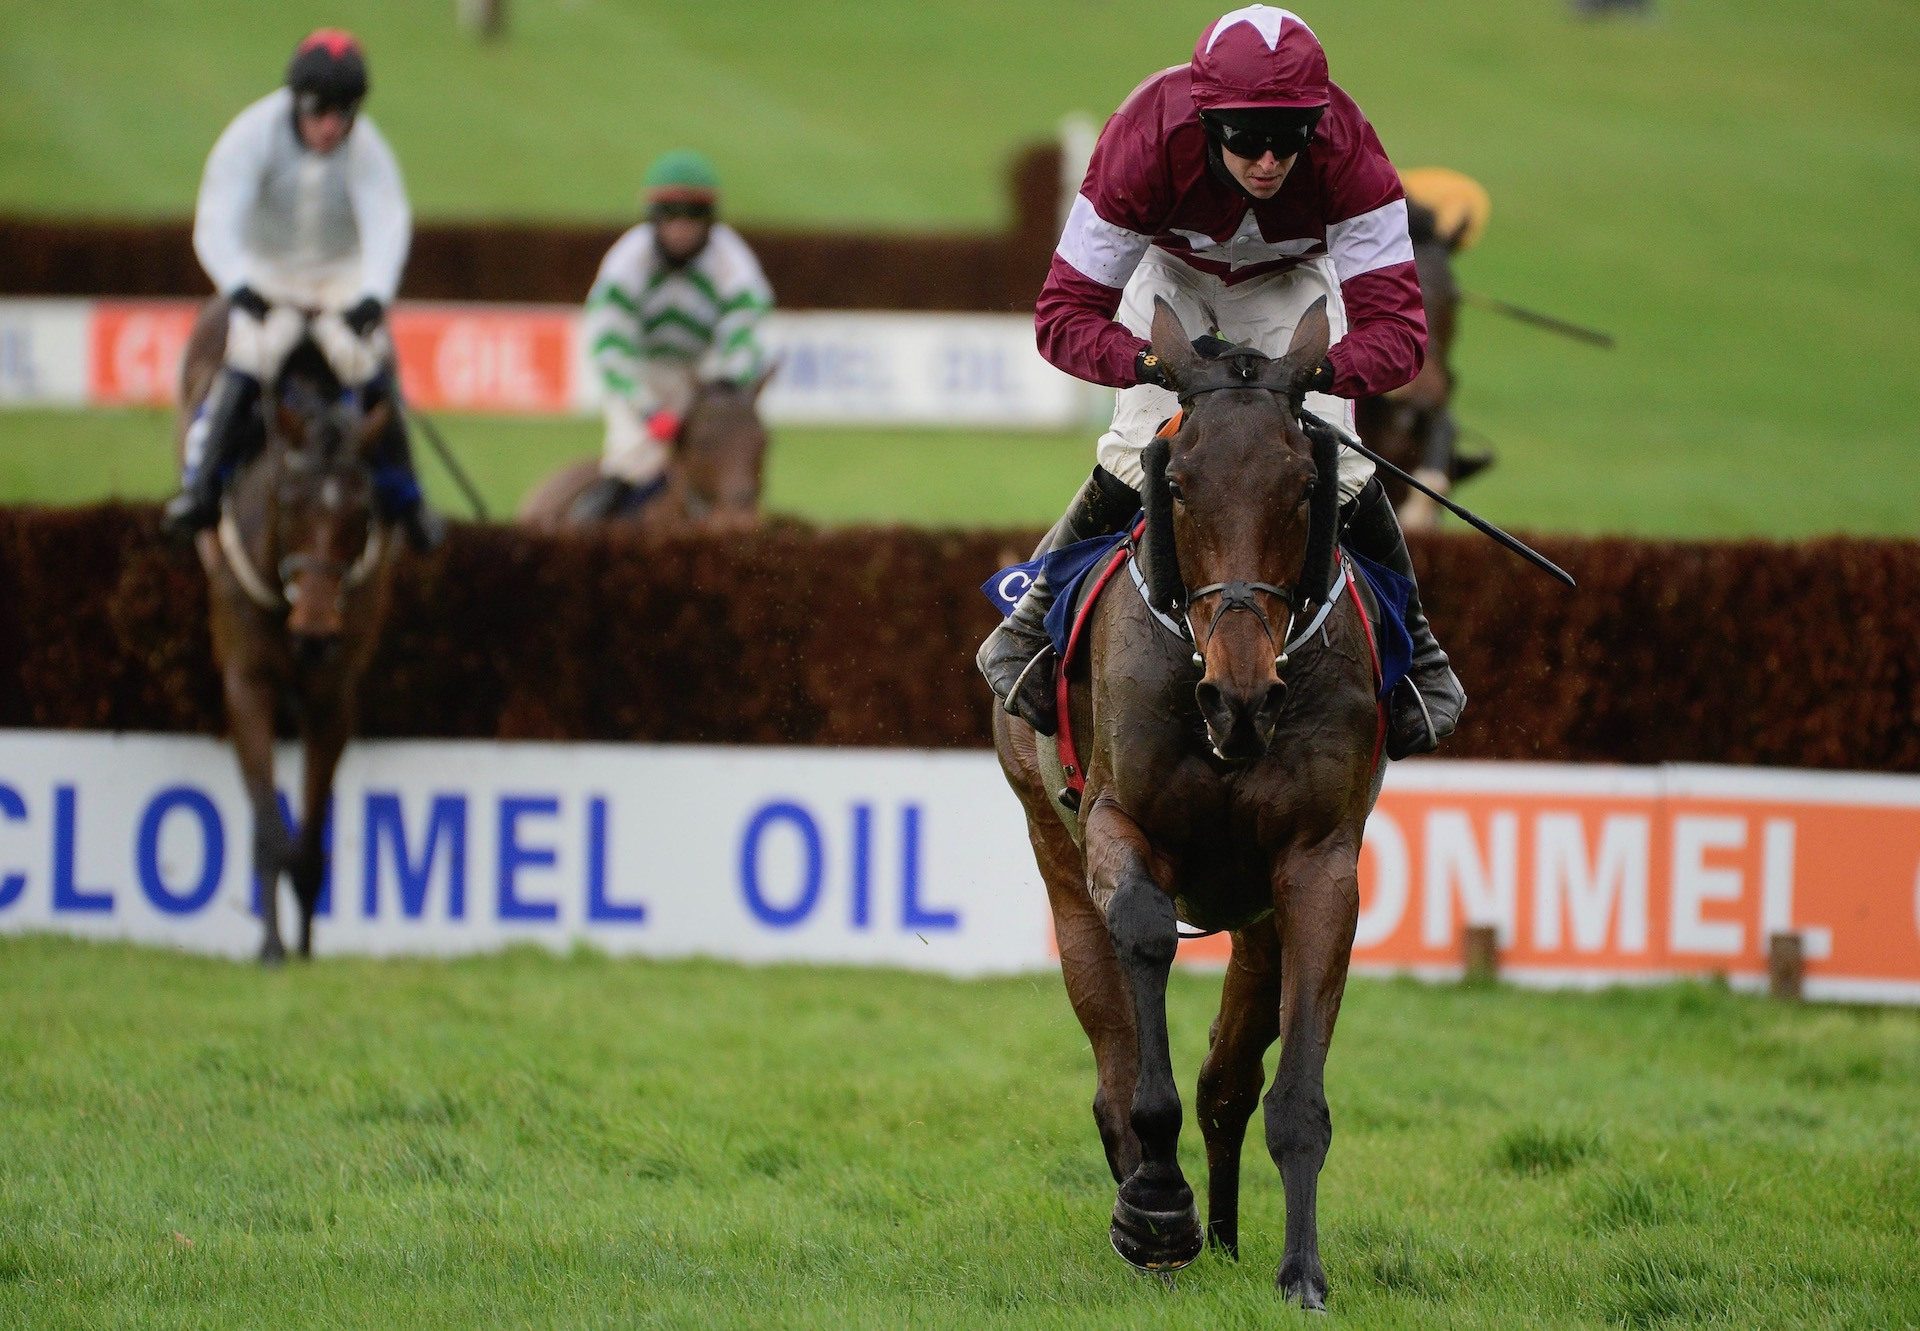 Shattered Love (Yeats) Wins The Listed Mares Chase At Clonmel For A Second Time